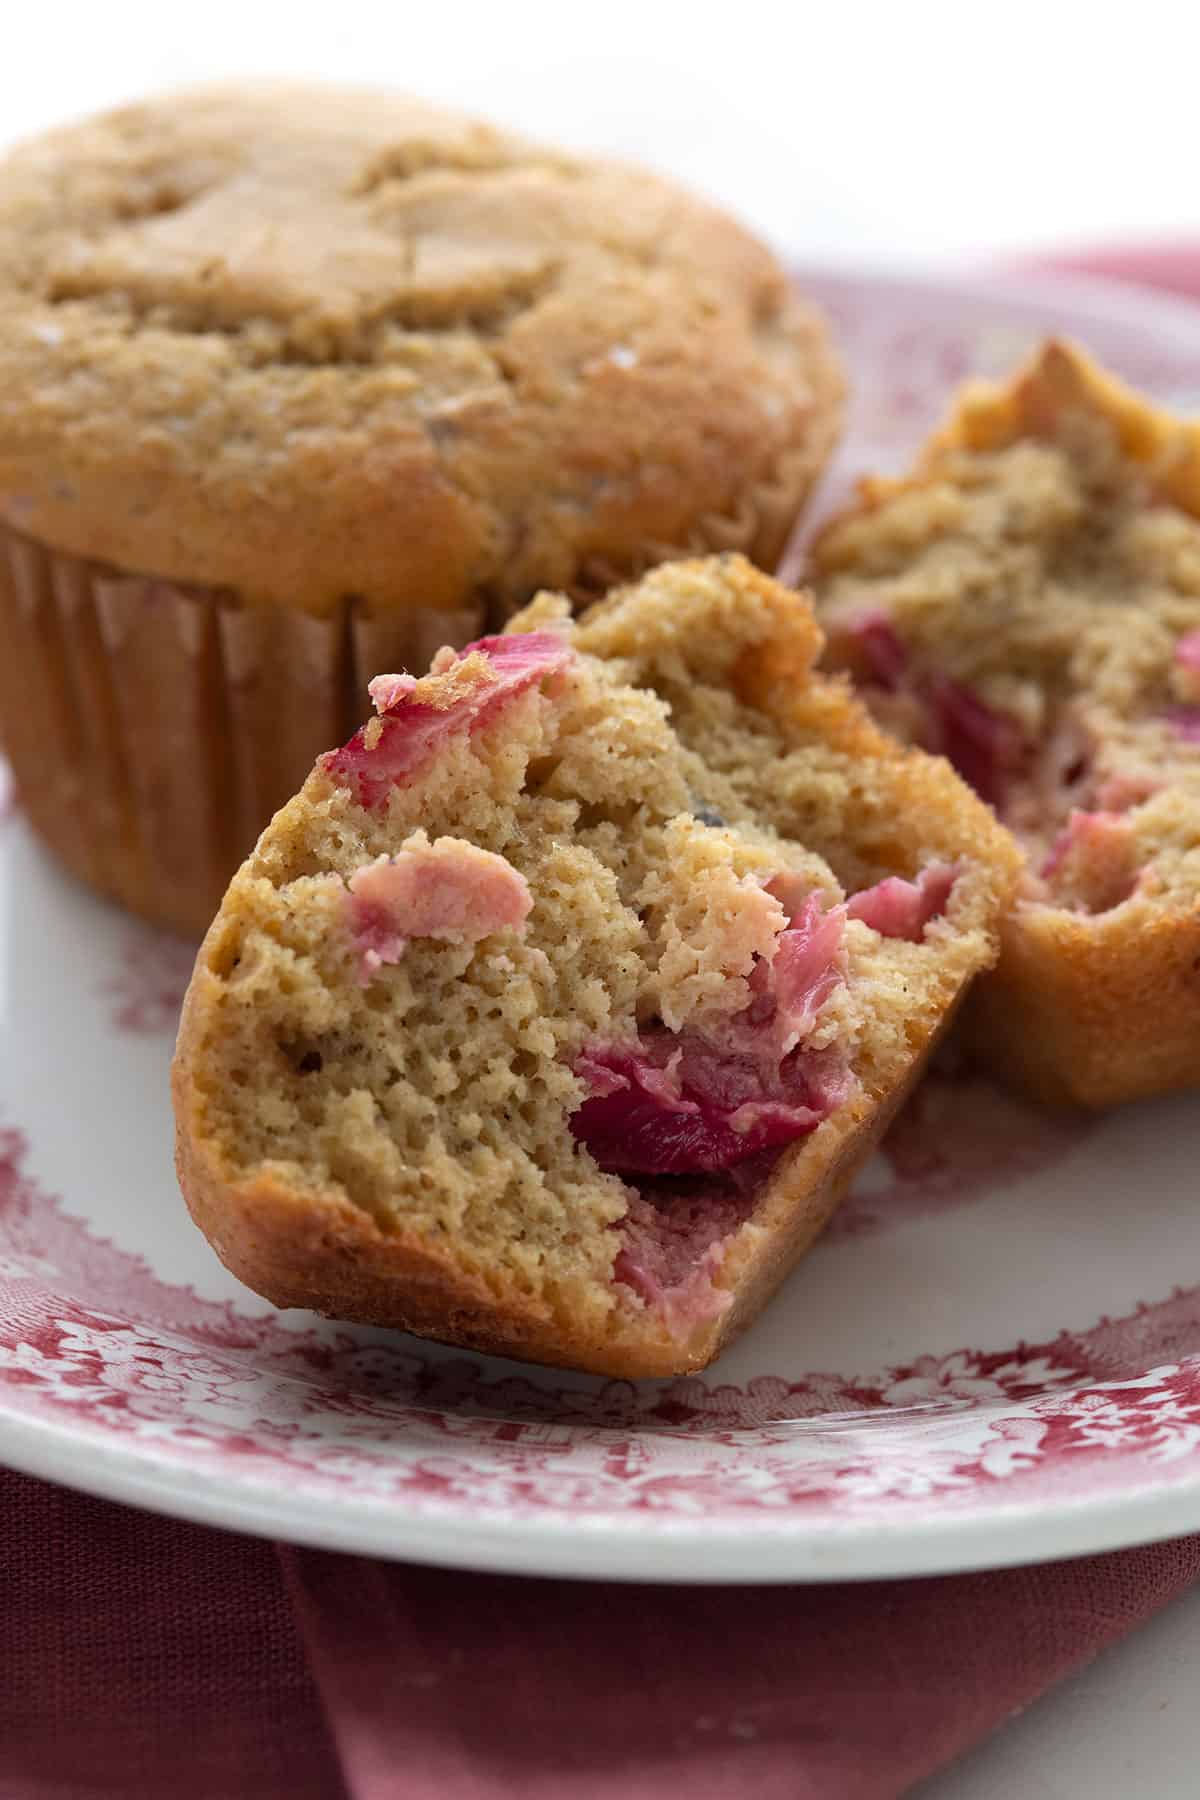 Close up shot of a keto rhubarb muffin, broken open, on a red patterned plate.